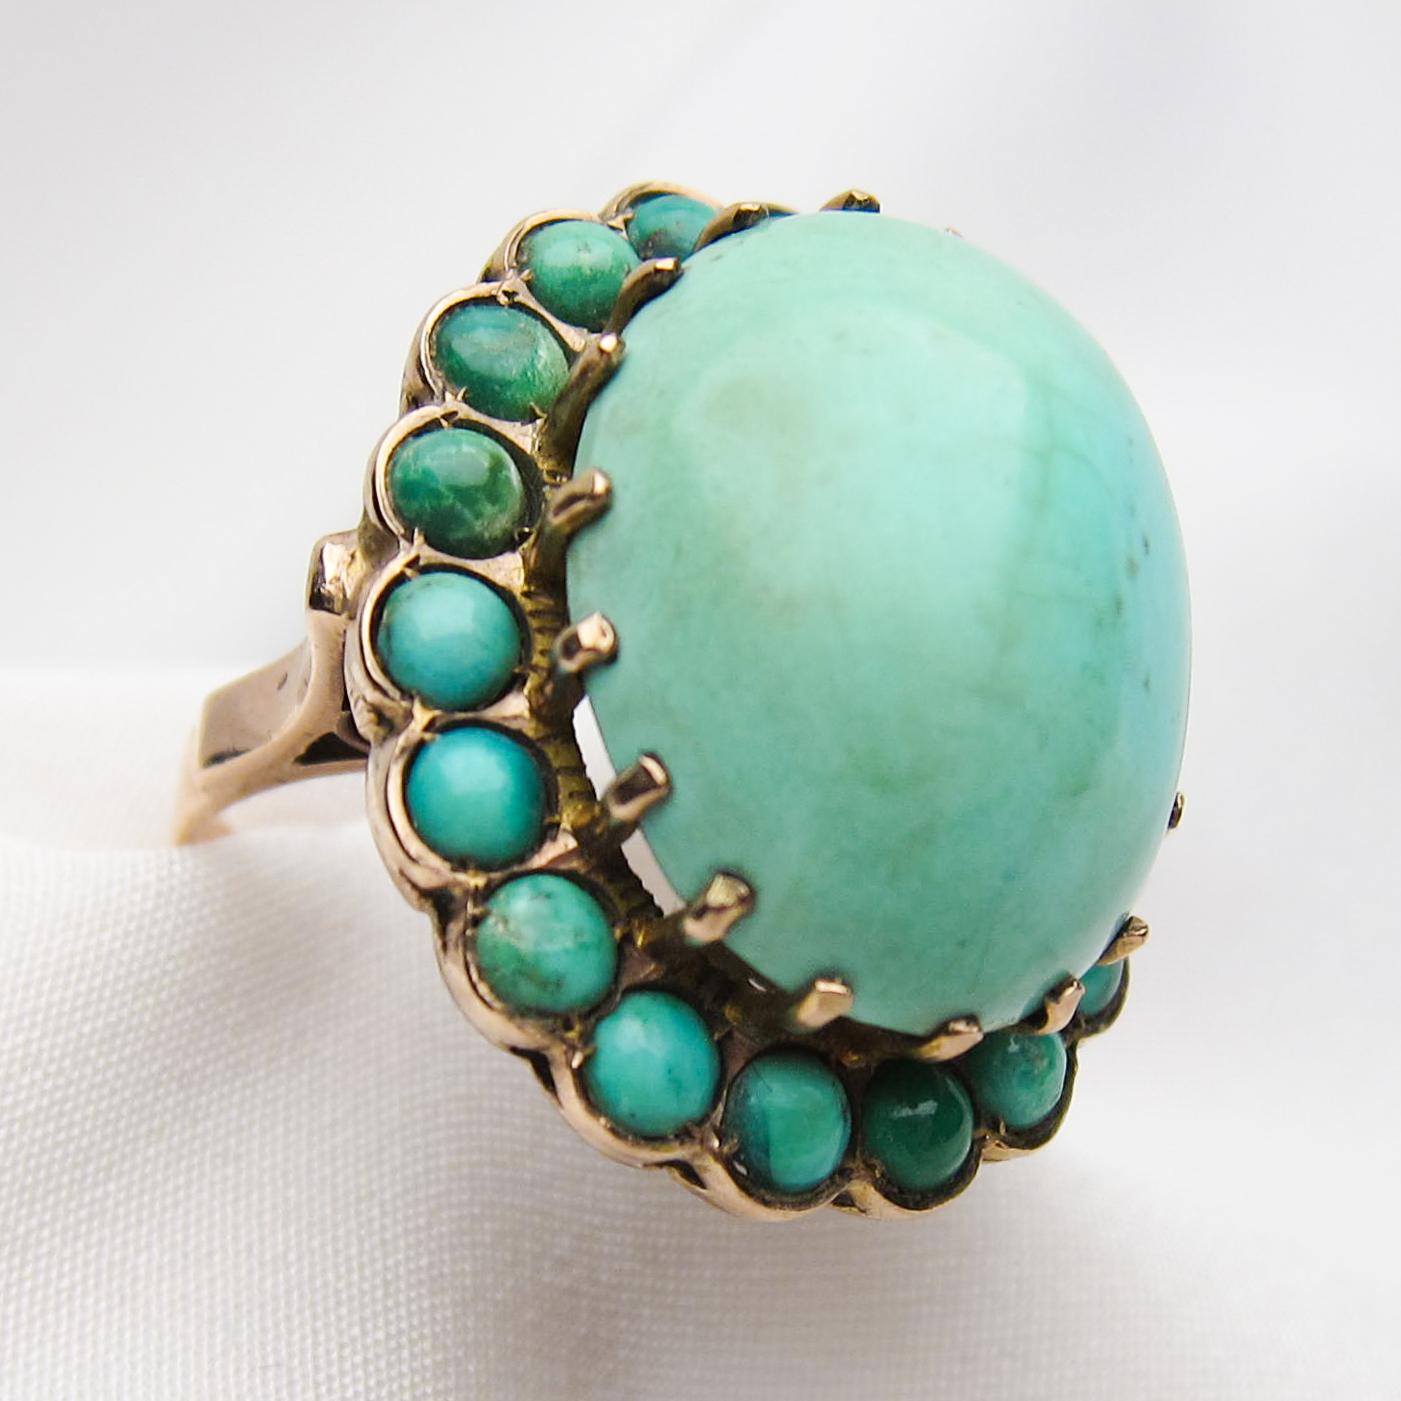 This spectacular midcentury turquoise ring is a wonderful find and a true statement piece. The setting is 14KT yellow gold featuring a 26.86 carat cabochon-cut turquoise, surrounded by small cabochon turquoise stones. This is an amazing right-hand